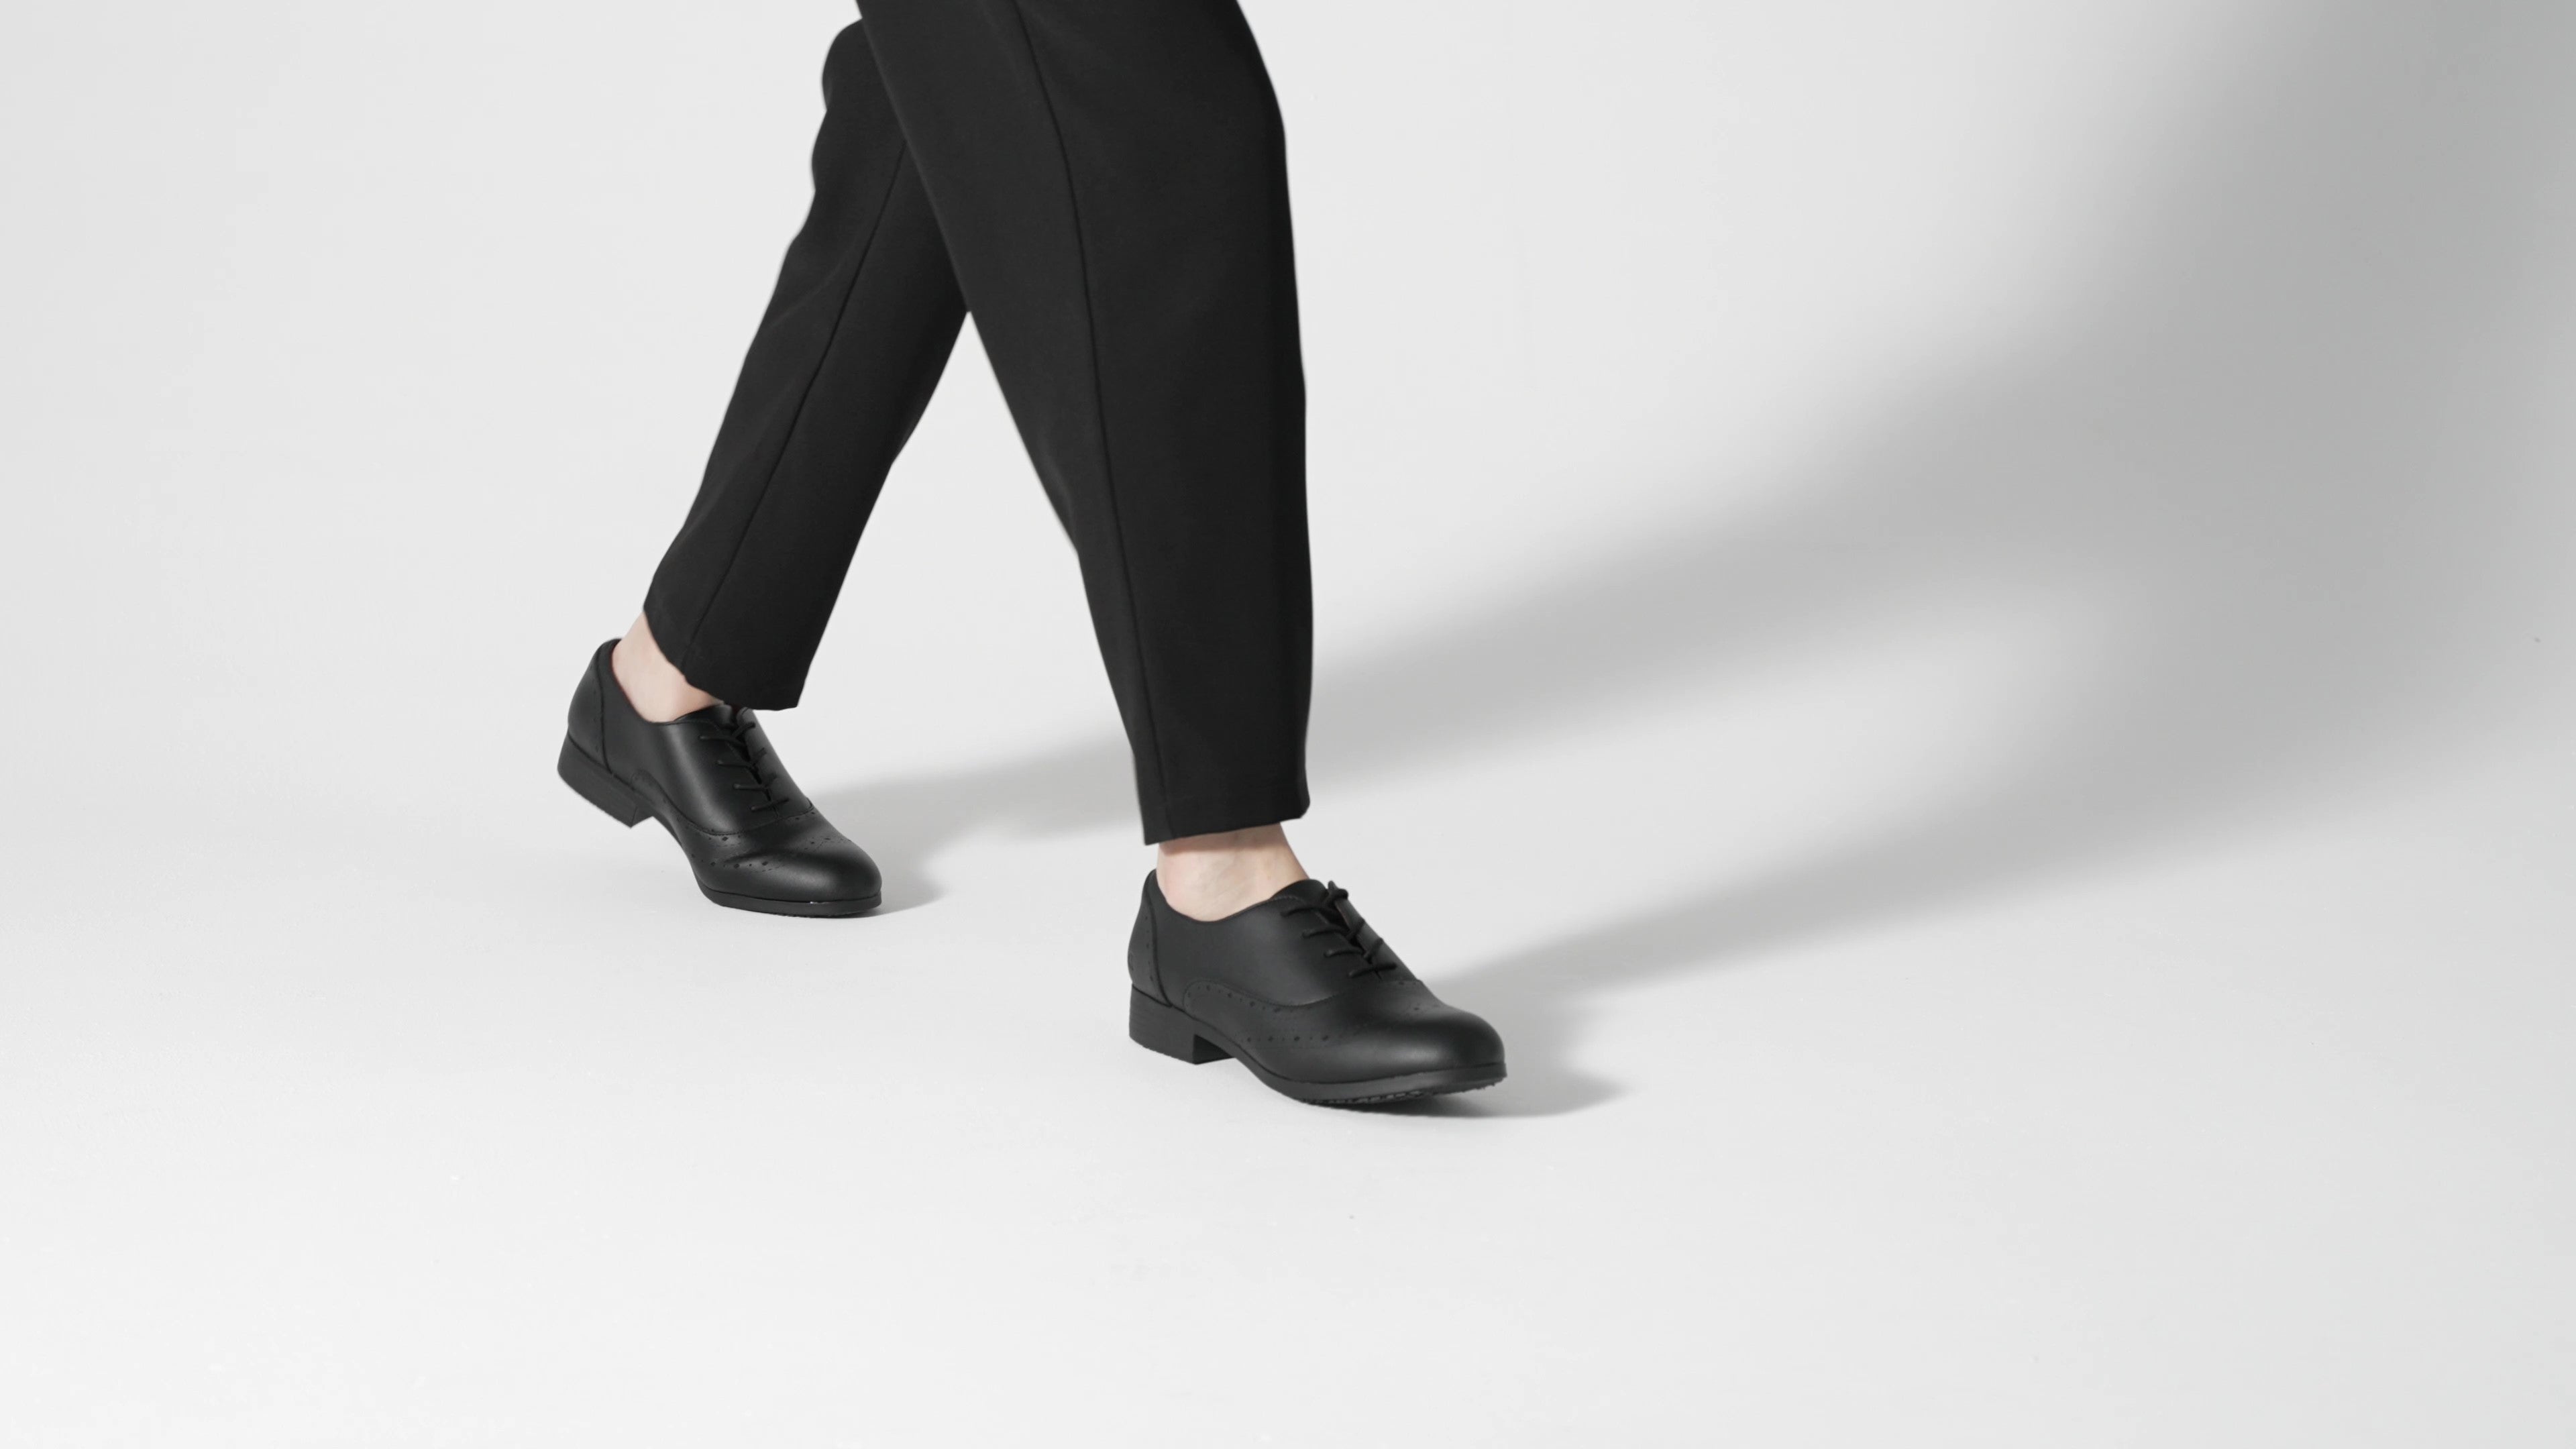 The Kora from Shoes For Crews are slip-resistant dress shoes, product video.